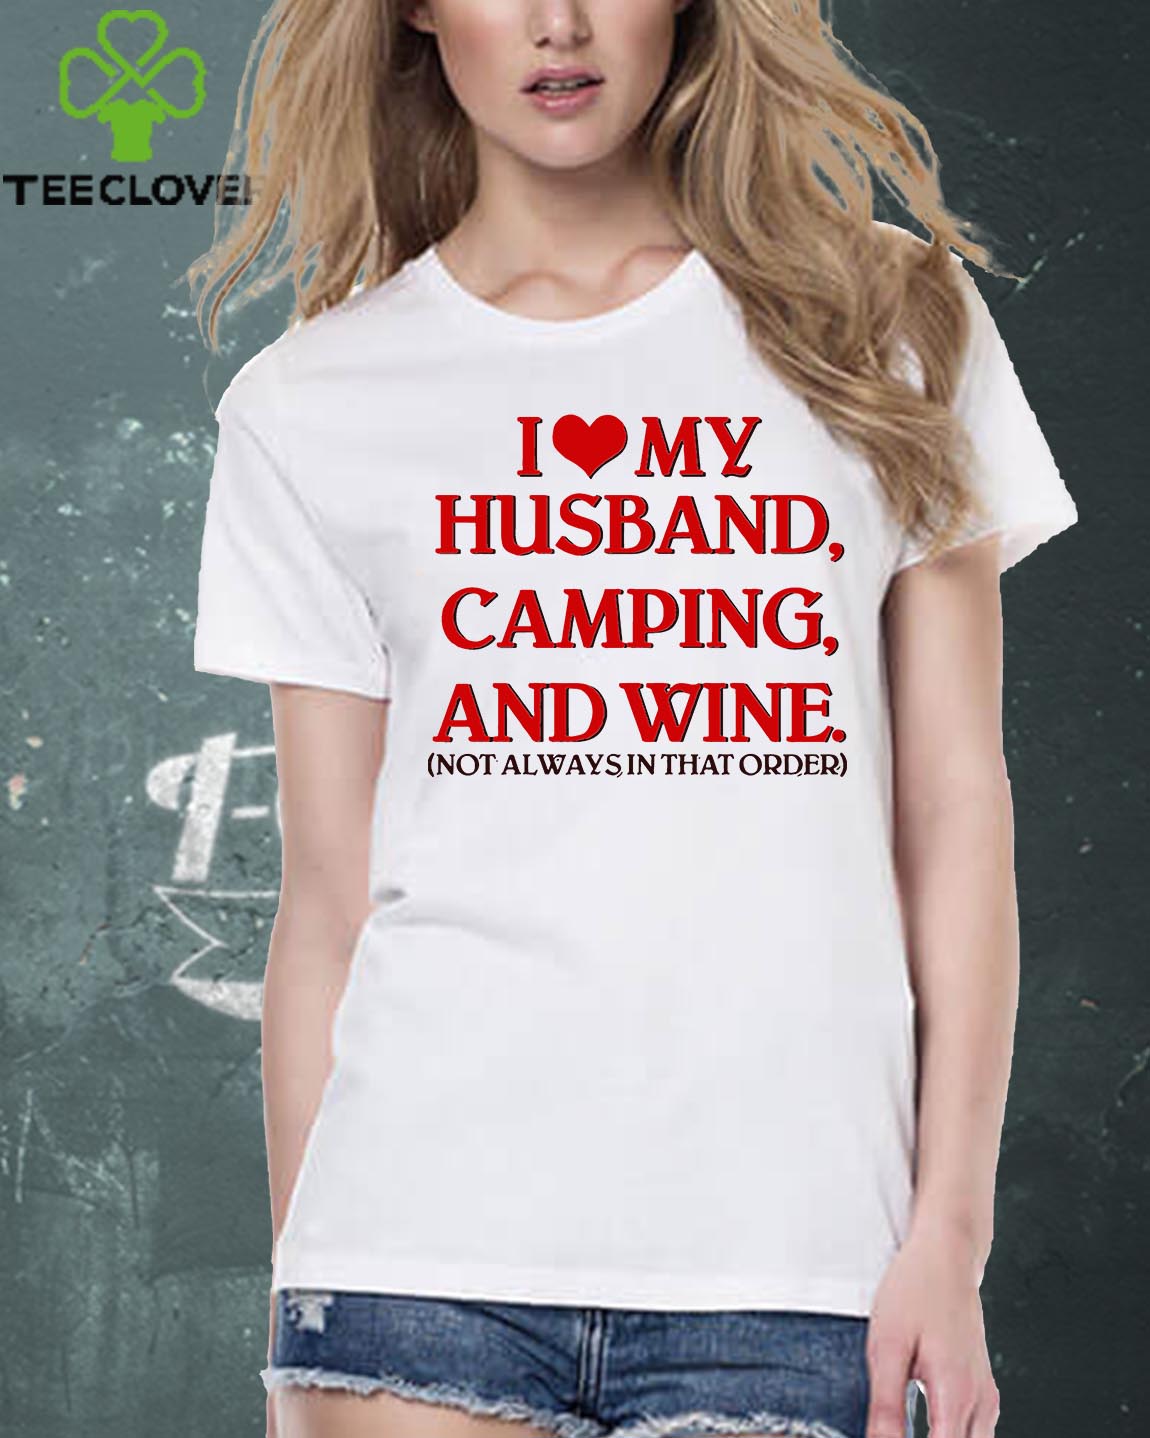 I Love My Husband Camping And Wine Not Always In That Order shirtI Love My Husband Camping And Wine Not Always In That Order shirt